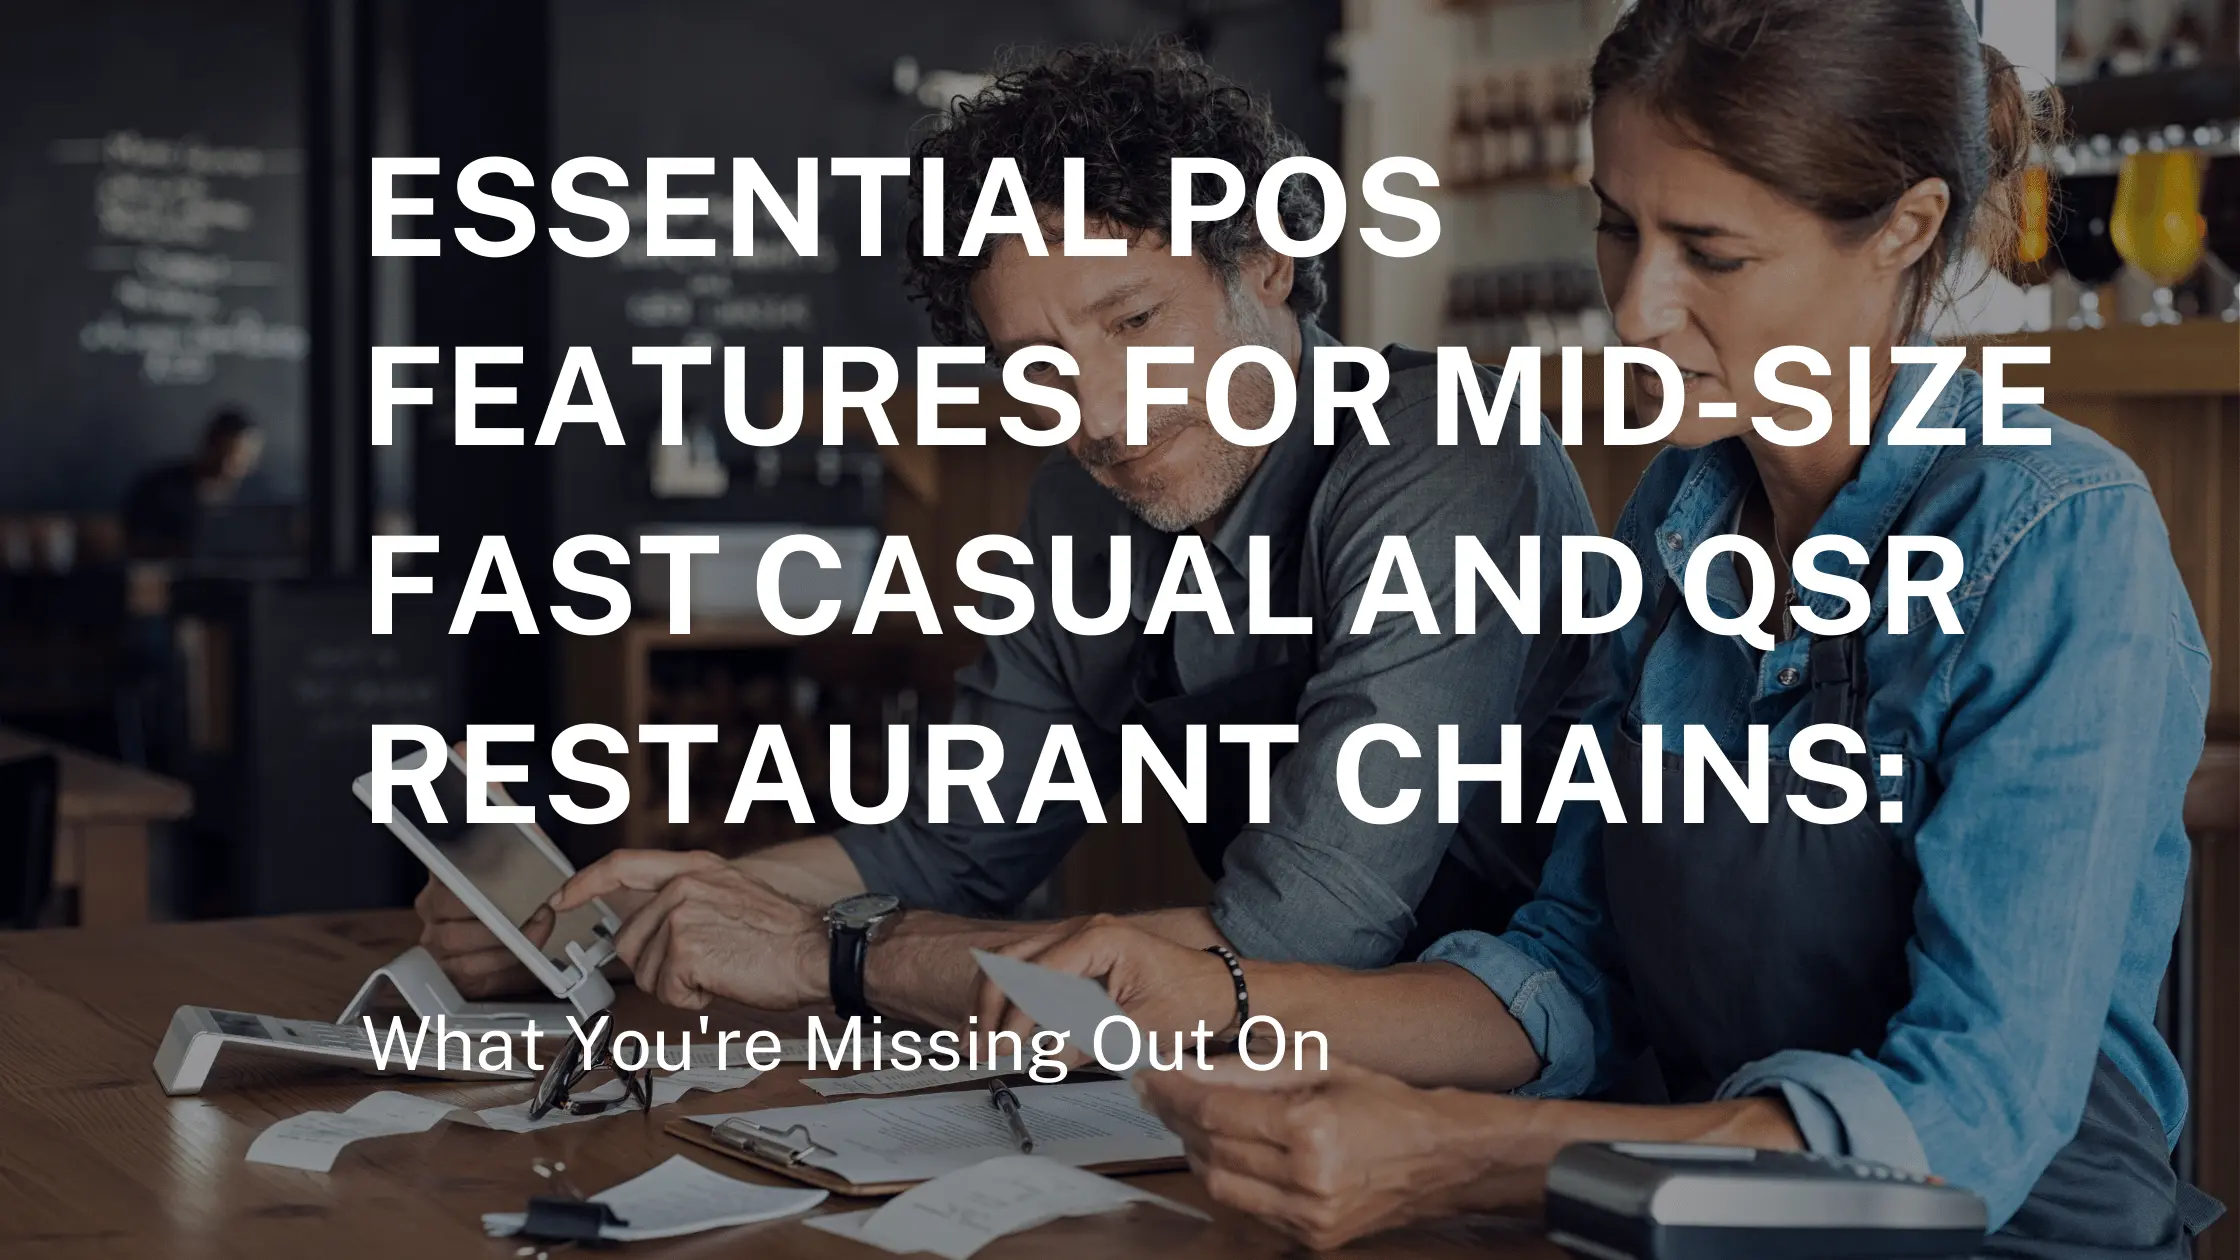 Ideal POS Features for Mid-Size Fast Casual and QSR Restaurant Chains